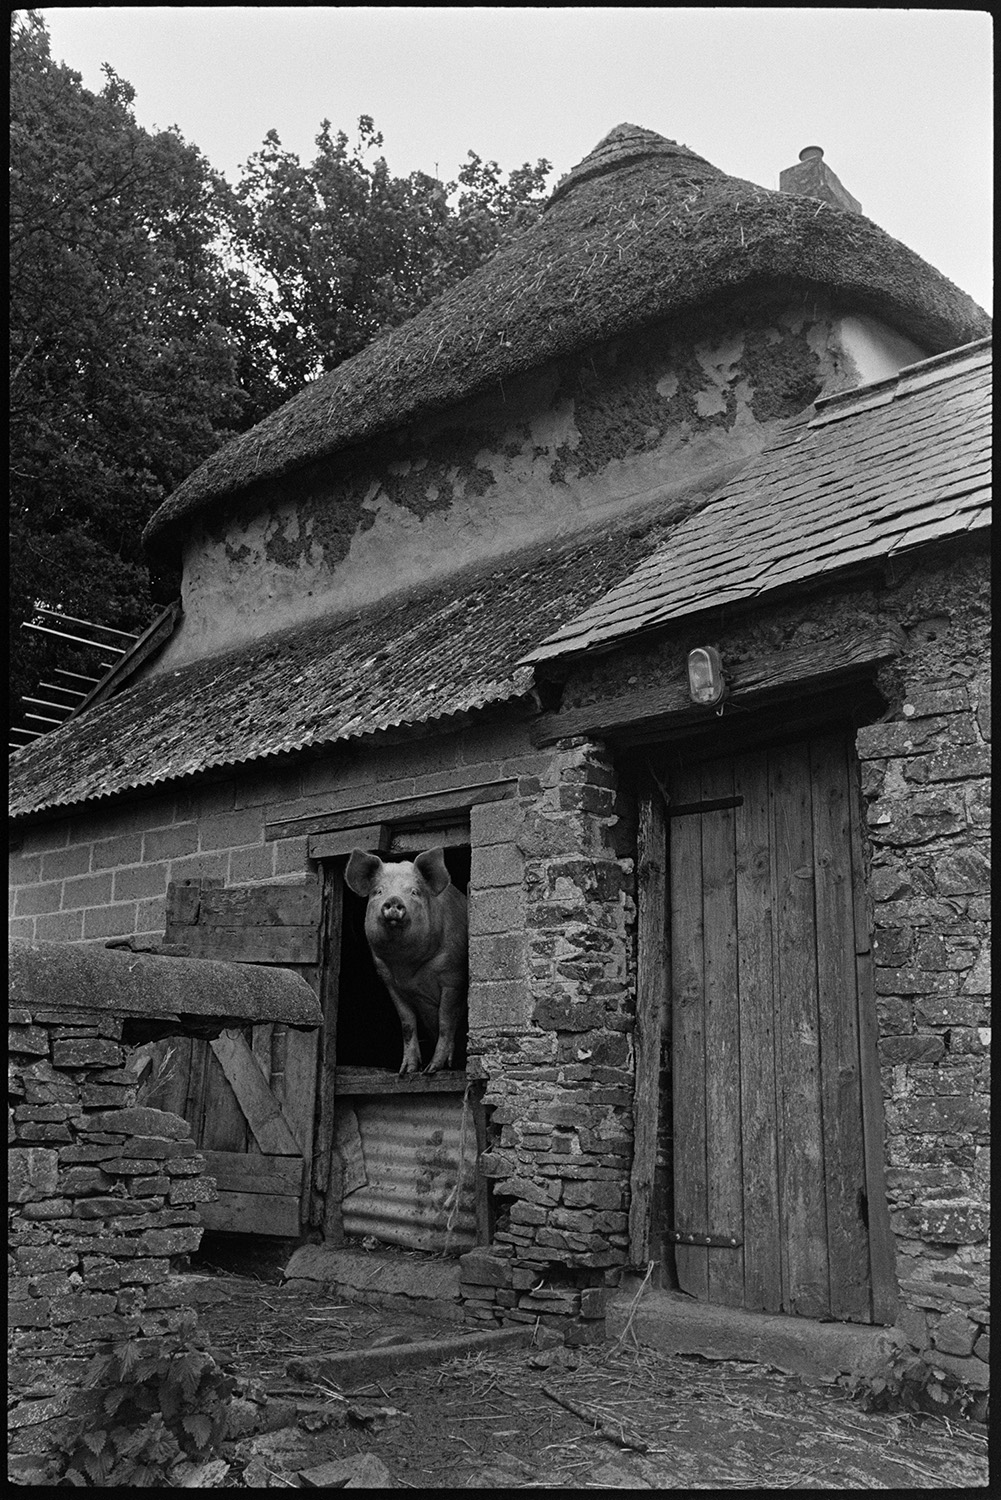 Pig looking out of pigsty in barn. 
[A pig looking over a makeshift corrugated iron stable door to a barn at Ashwell, Dolton. The pigs front trotters are resting on the door. The barn has a corrugated iron roof and is attached to the thatched farmhouse and another stone barn.]